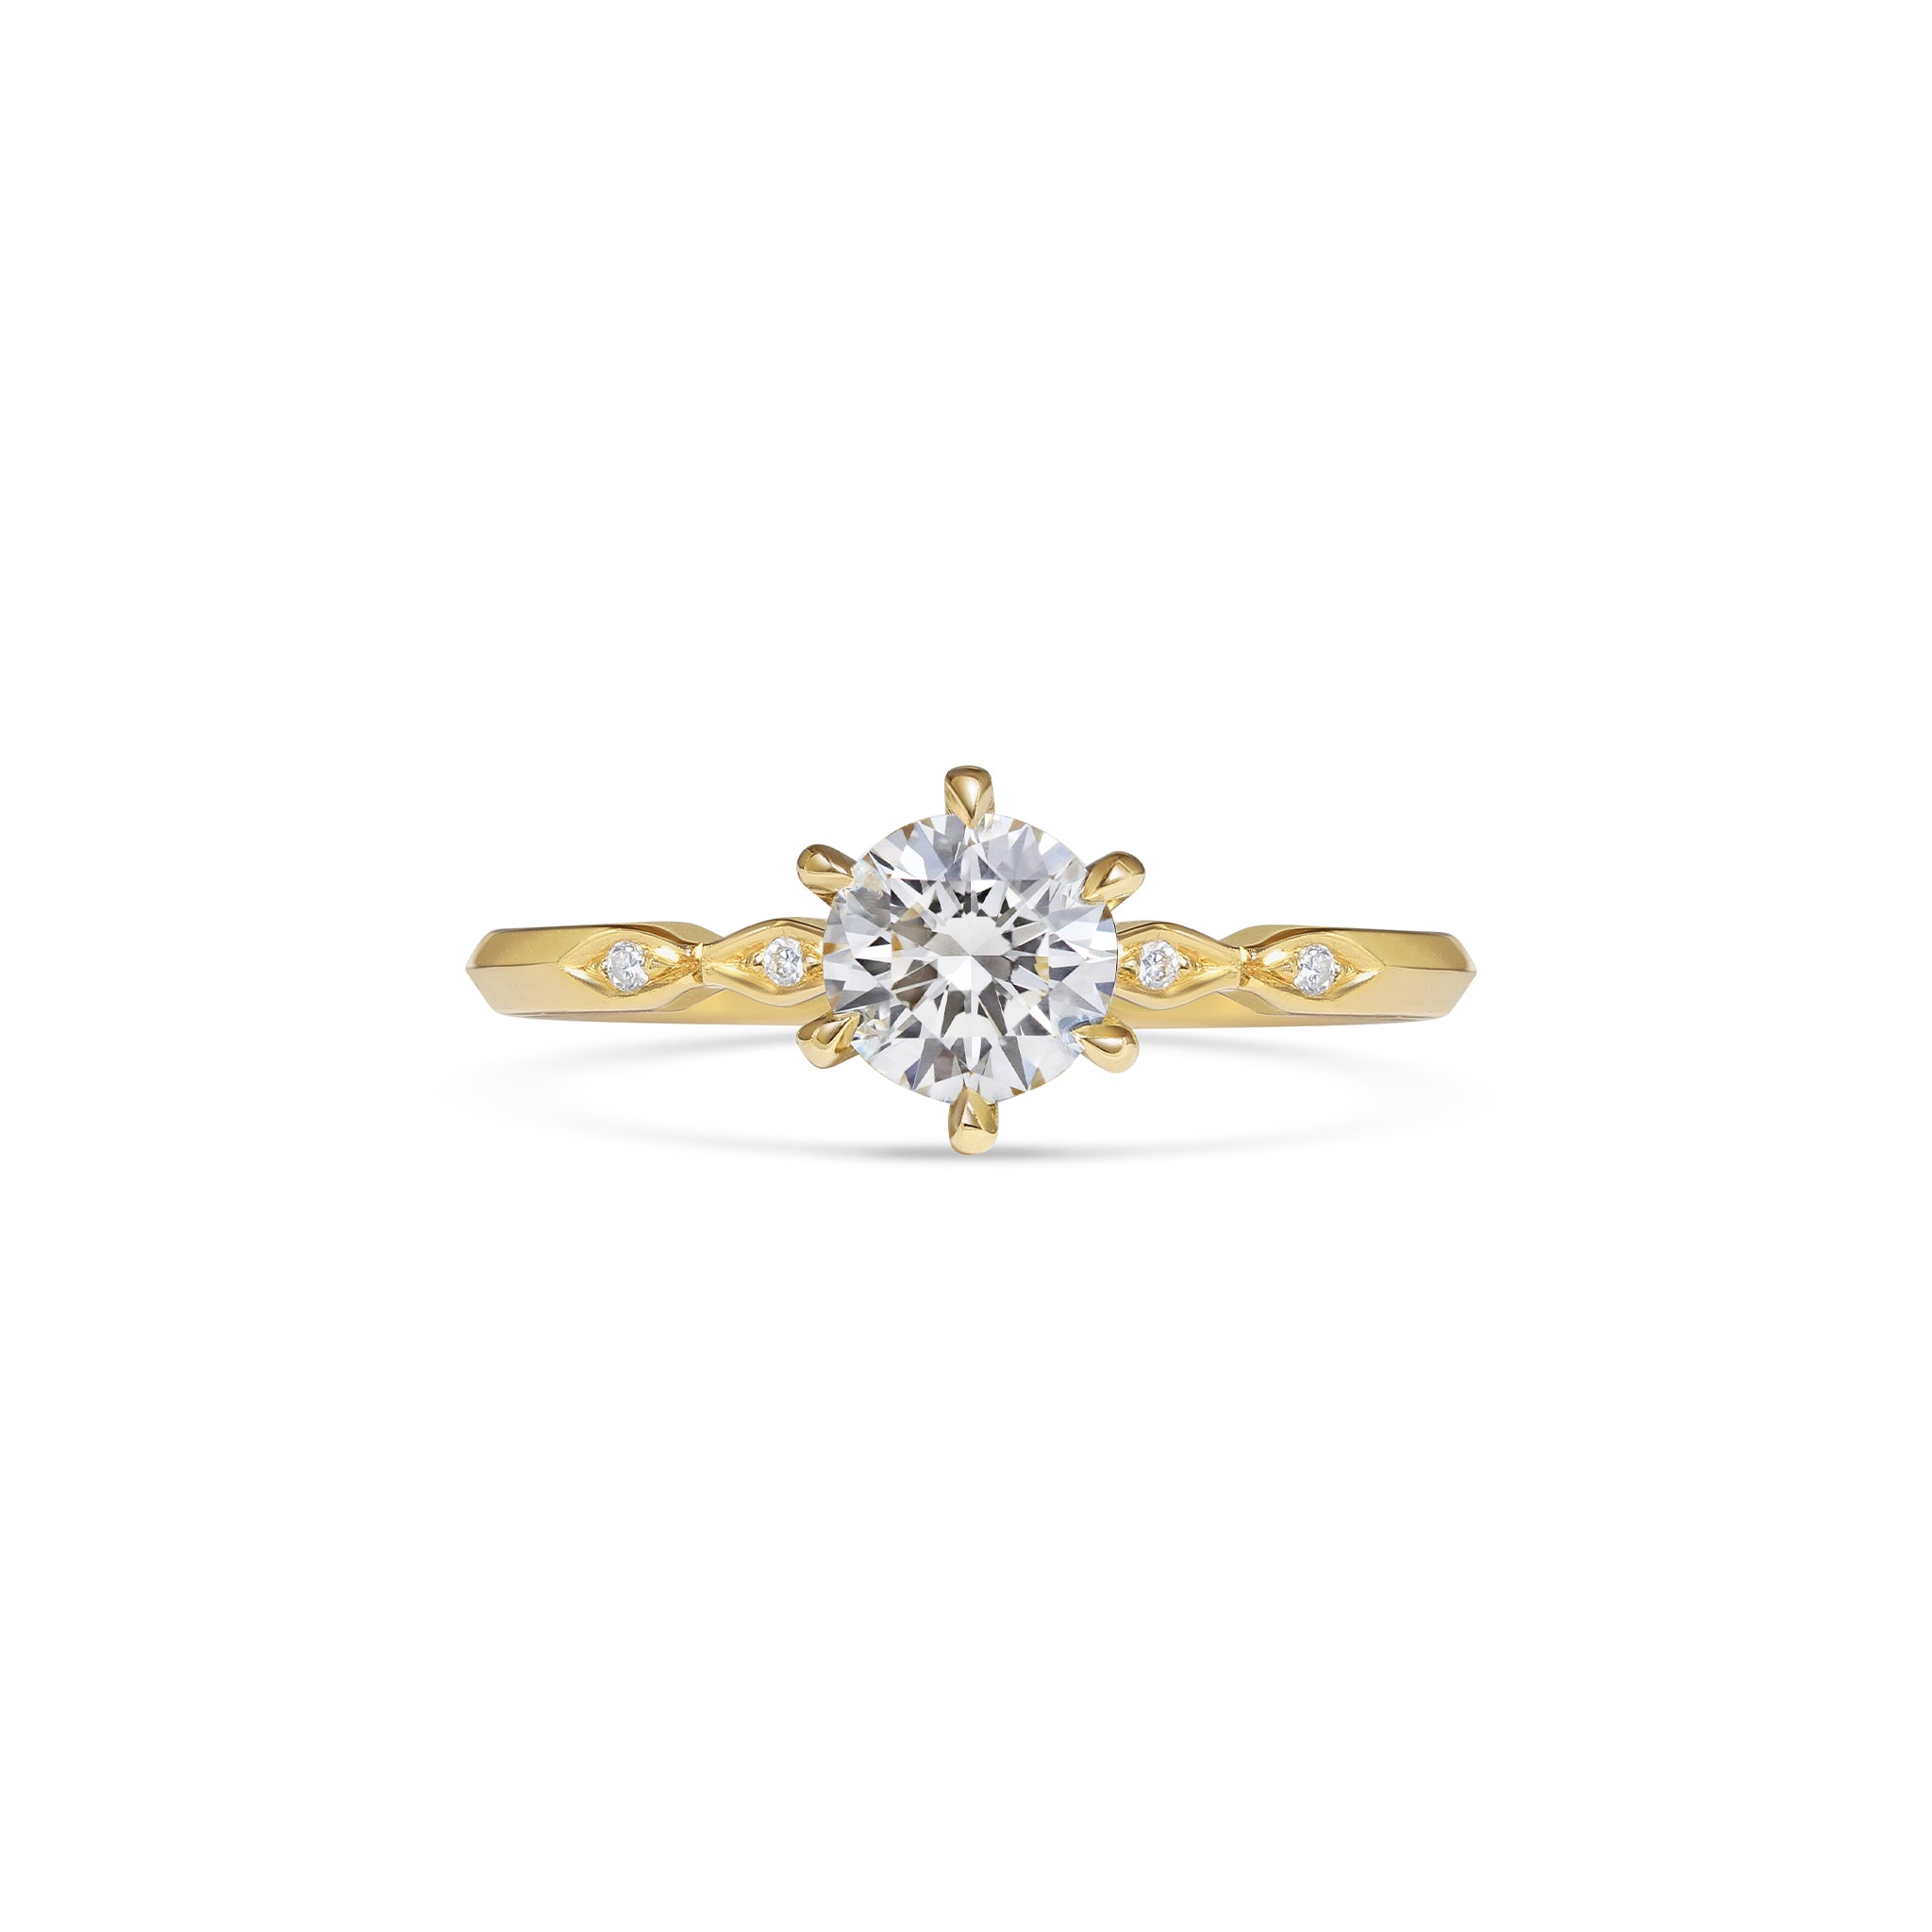 The Evelyn Ring - Round Cut 0.70ct - In Stock by East London jeweller Rachel Boston | Discover our collections of unique and timeless engagement rings, wedding rings, and modern fine jewellery.